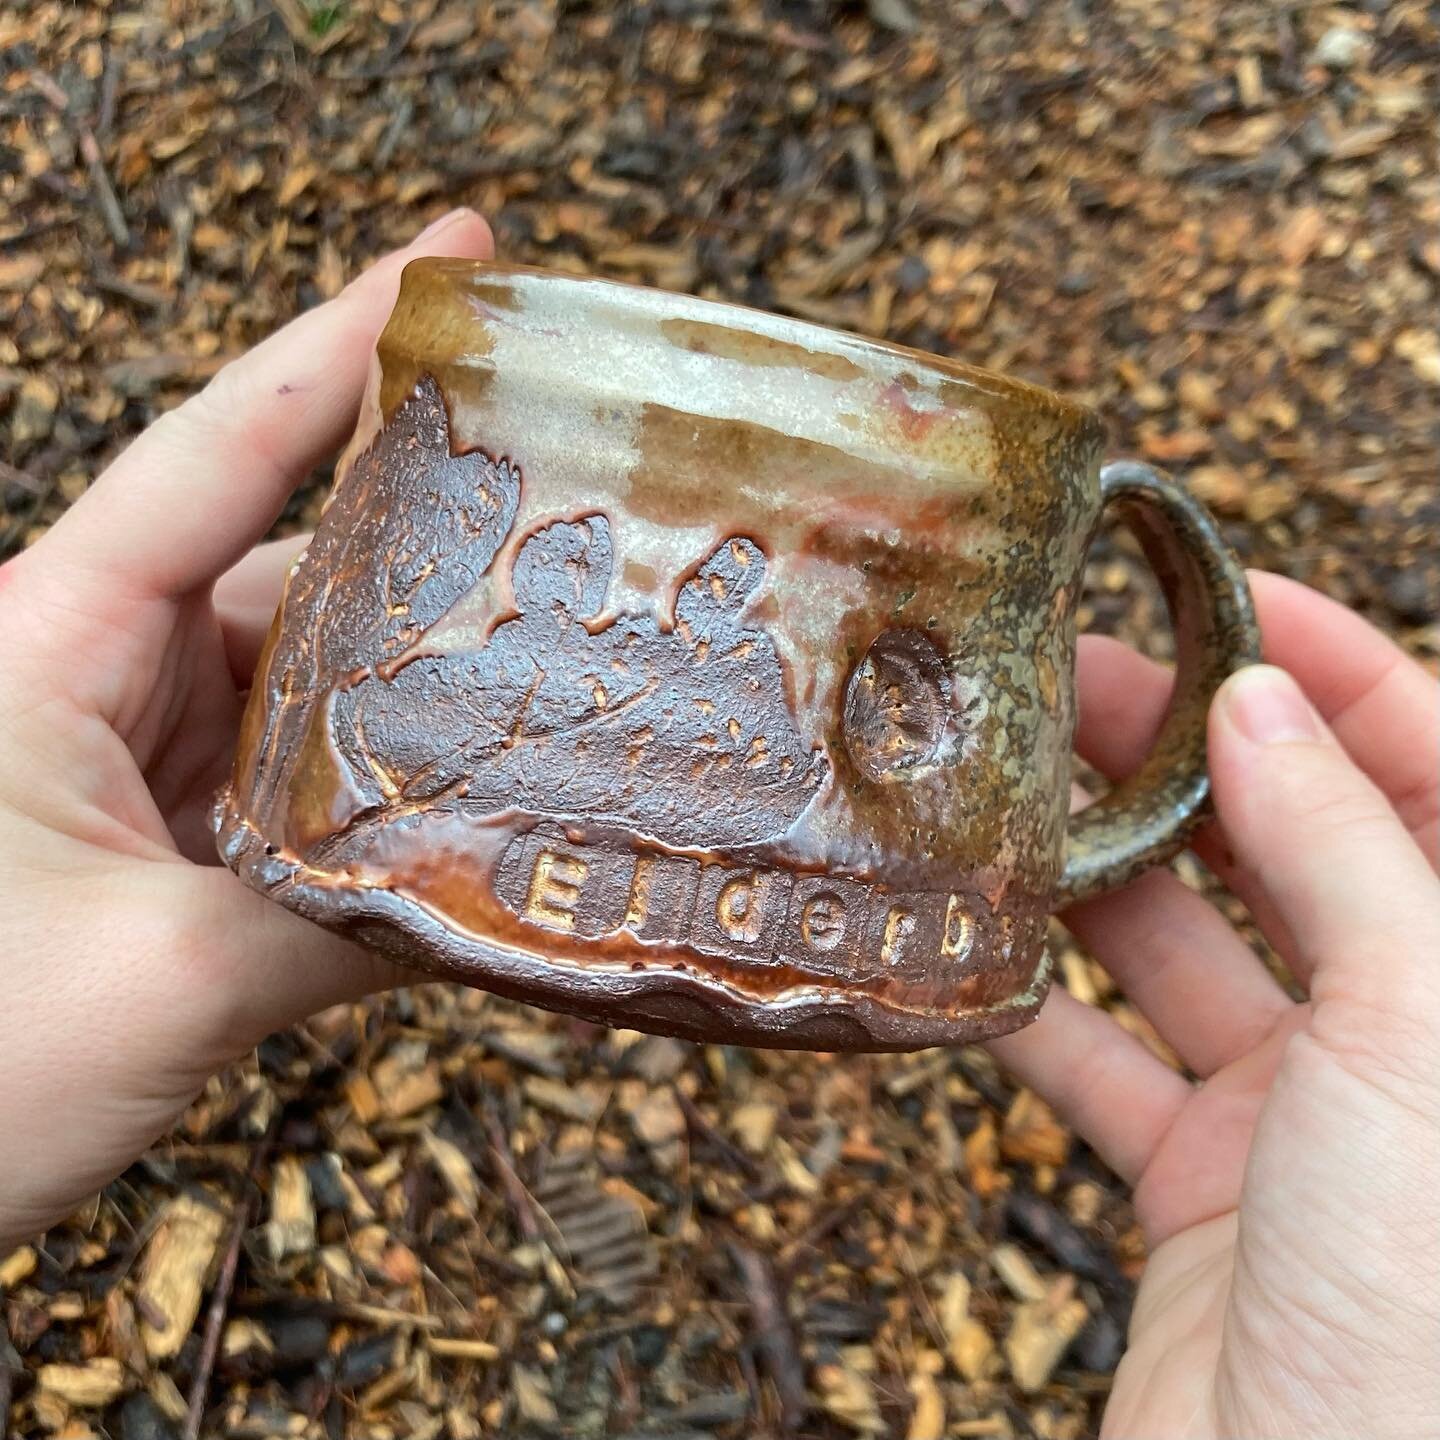 Hi All! Tomorrow I&rsquo;ll be debuting my new series of Native Plant mugs and wood fired jewelry for sale! I&rsquo;ll be set up at Feral Friends Farm in Baltimore, Maryland. DM for address and details